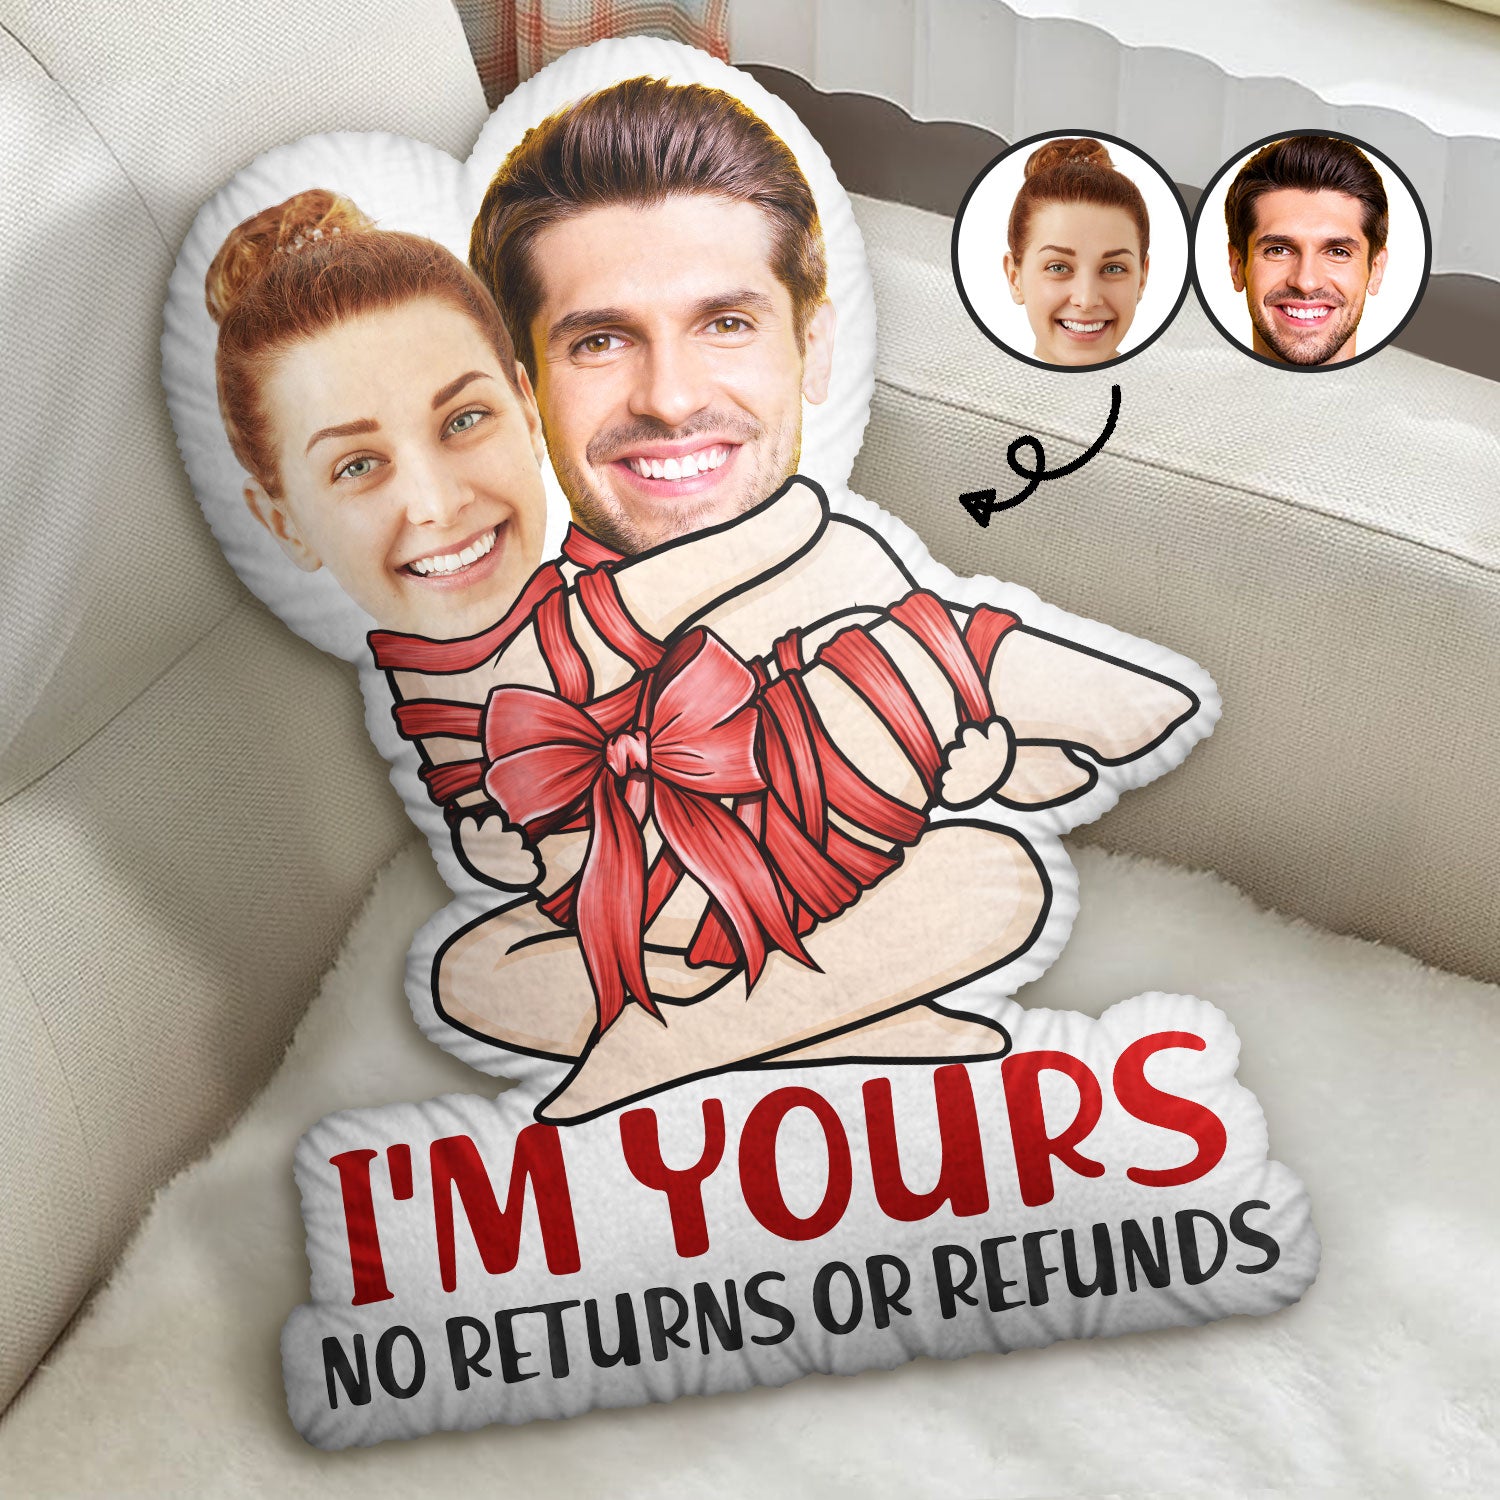 Custom Photo I'm Yours No Returns Or Refunds - Birthday, Anniversary Gift For Spouse, Husband, Wife, Couple - Personalized Custom Shaped Pillow